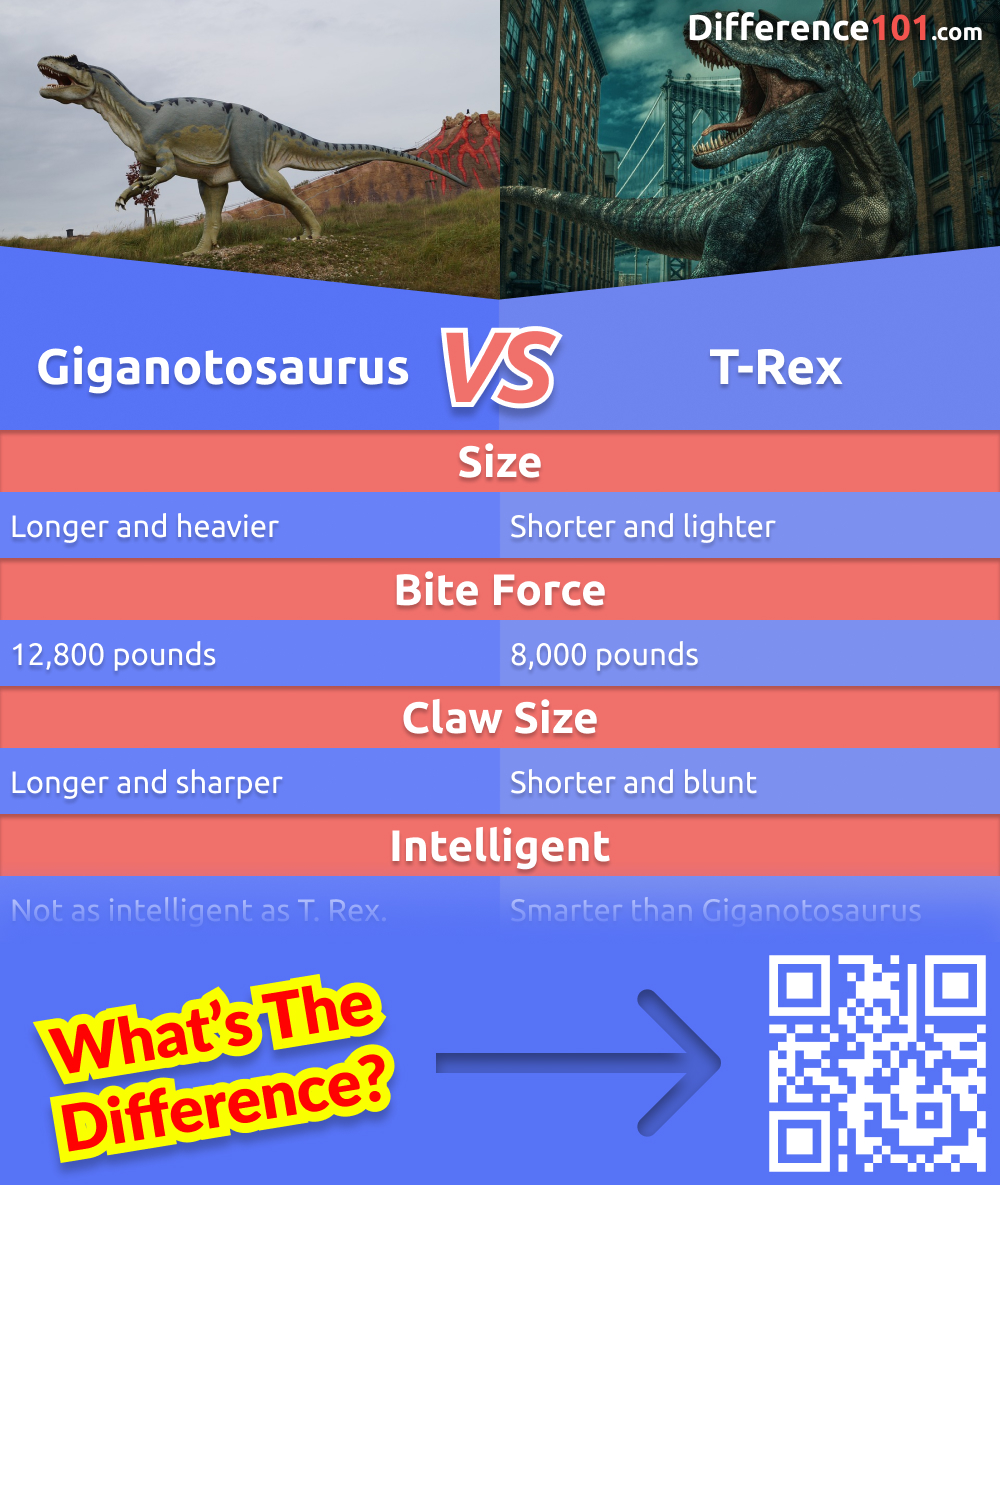 Giganotosaurus and T-Rex are two of the most popular dinosaurs. But what are the differences between them? What are the pros and cons of each? And how are they similar? Find out here.